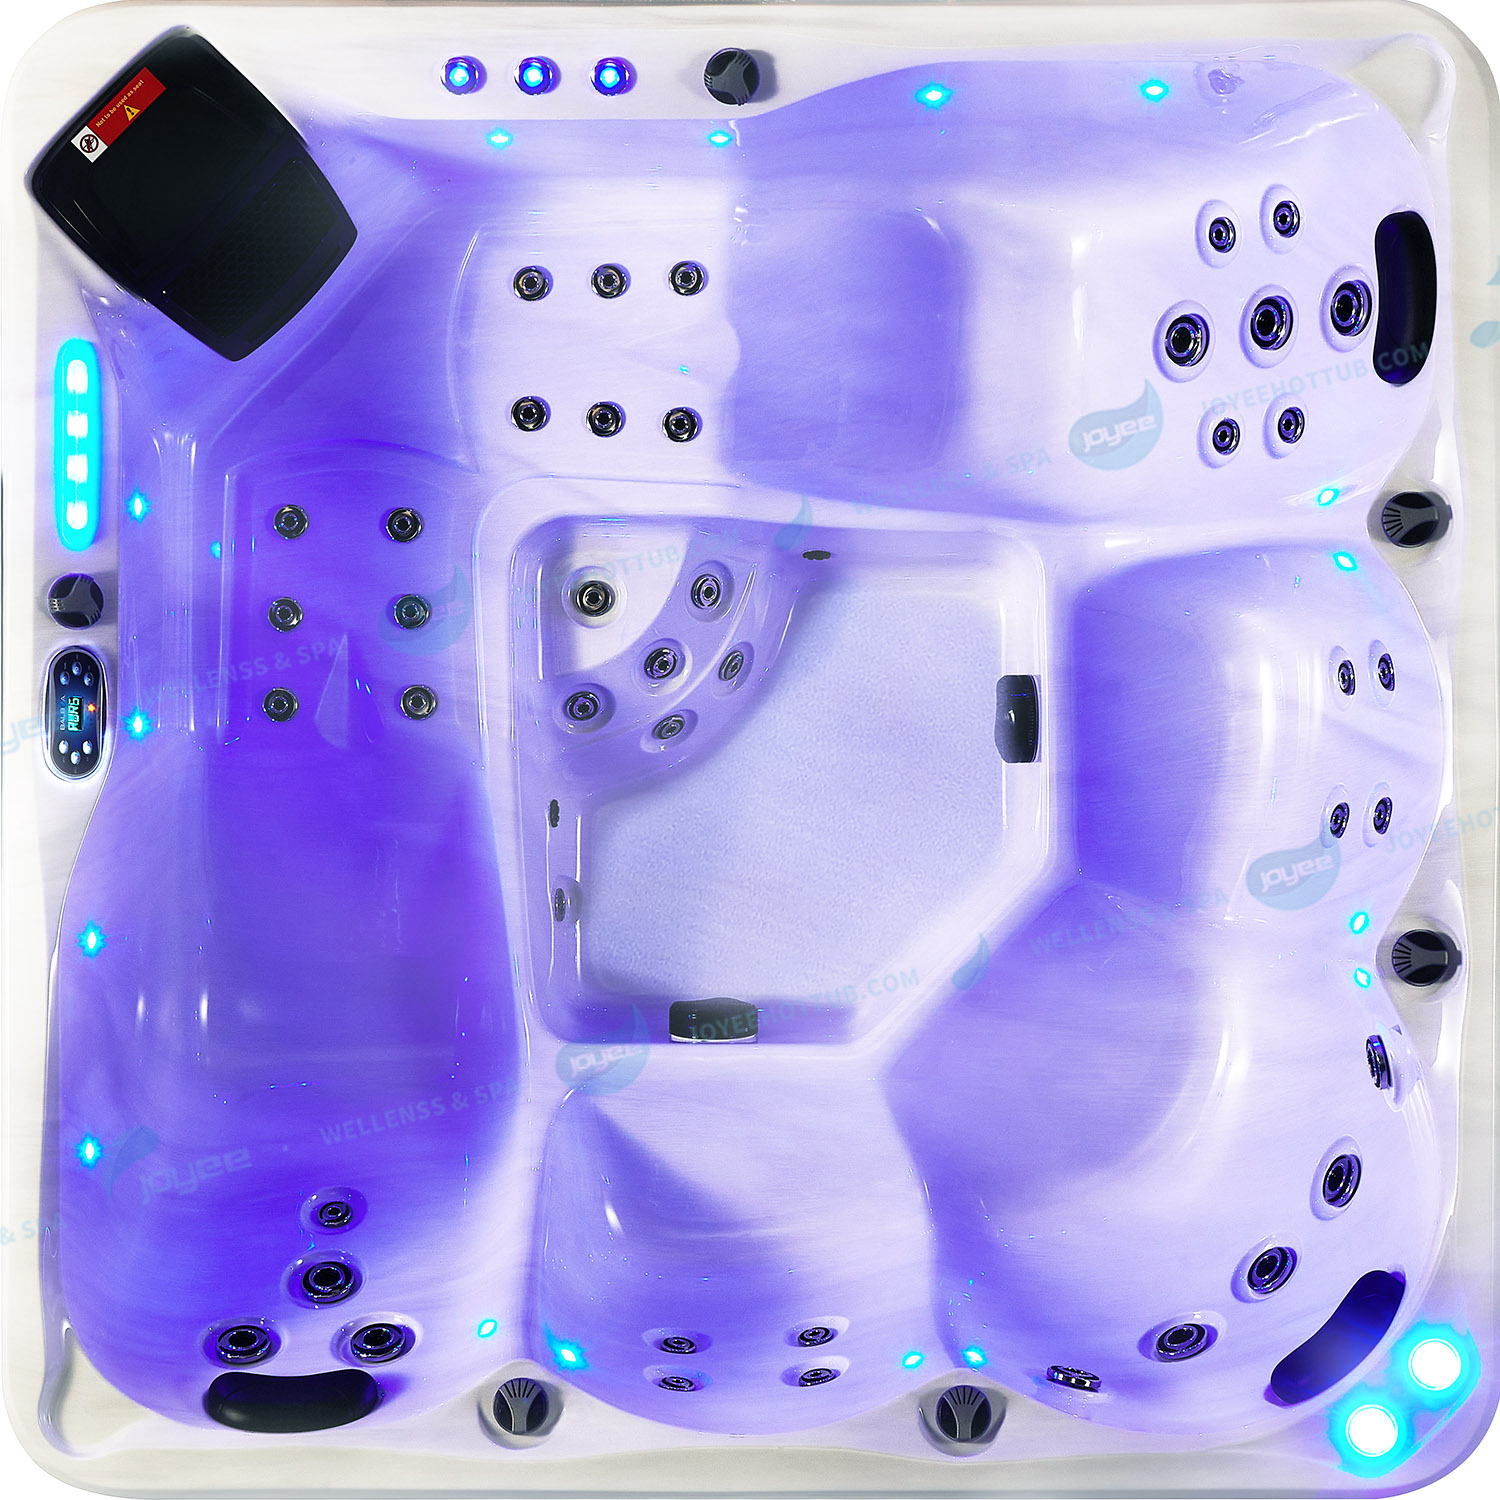 JOYEE new design mini spa pools 4 persons balbao outdoor hot tub/ Model: Sydney products video